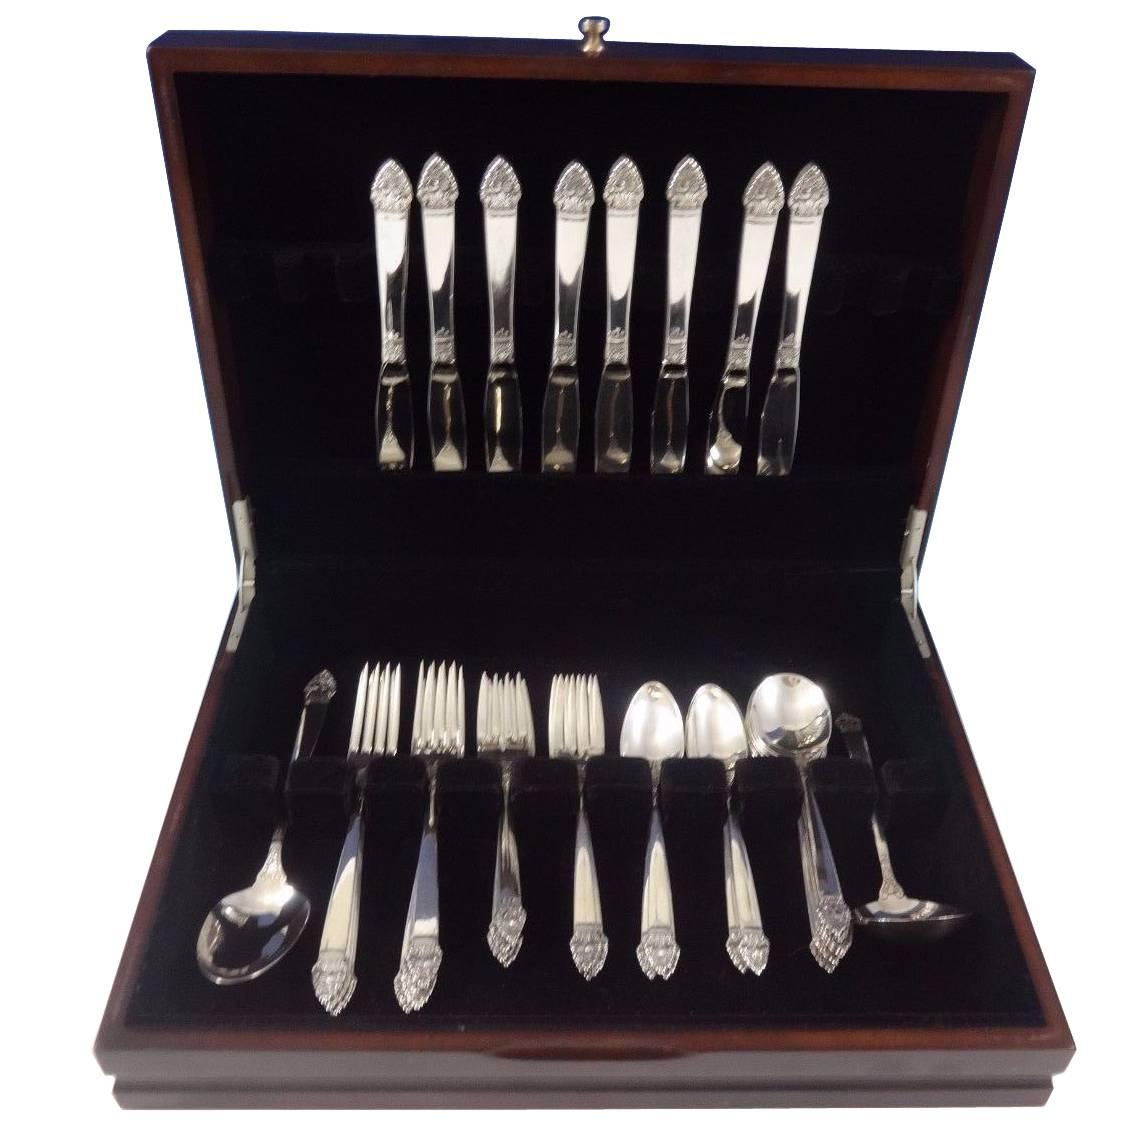 Stunning King Cedric by Oneida circa 1949 sterling silver flatware set of 42 pieces. This set includes:

Eight knives, 8 7/8